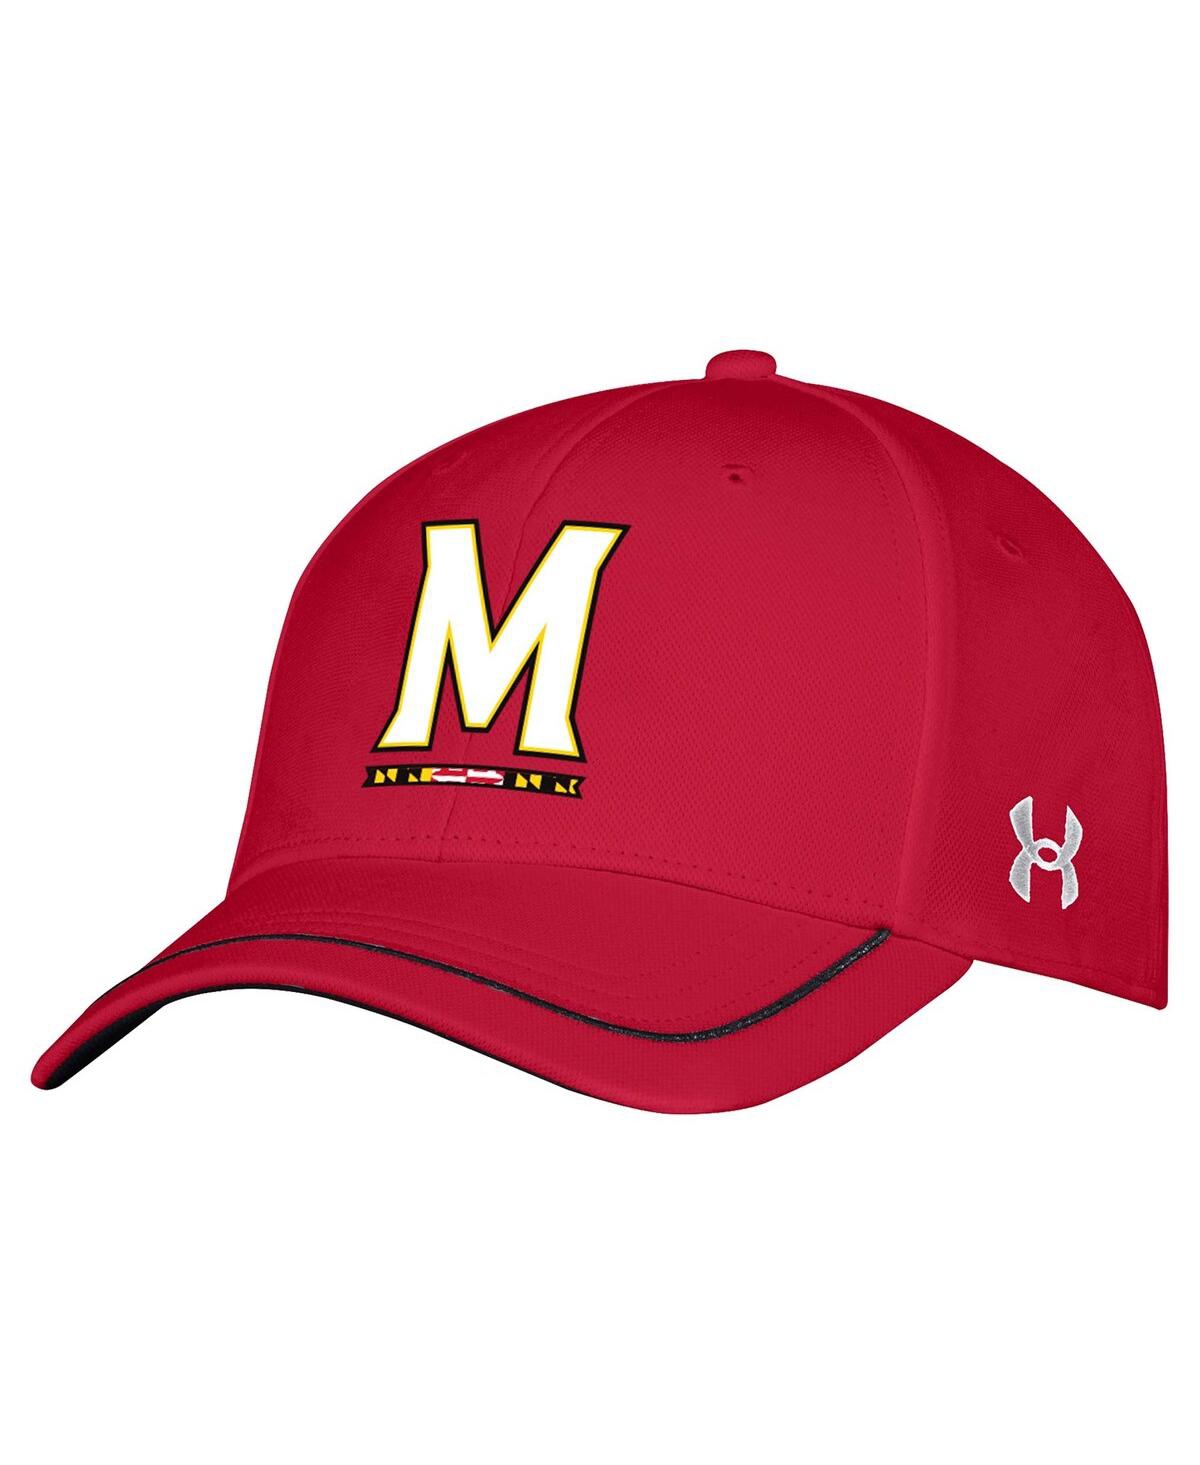 Under Armour Kids' Youth Boys And Girls  Red Maryland Terrapins Blitzing Accent Performance Adjustable Hat